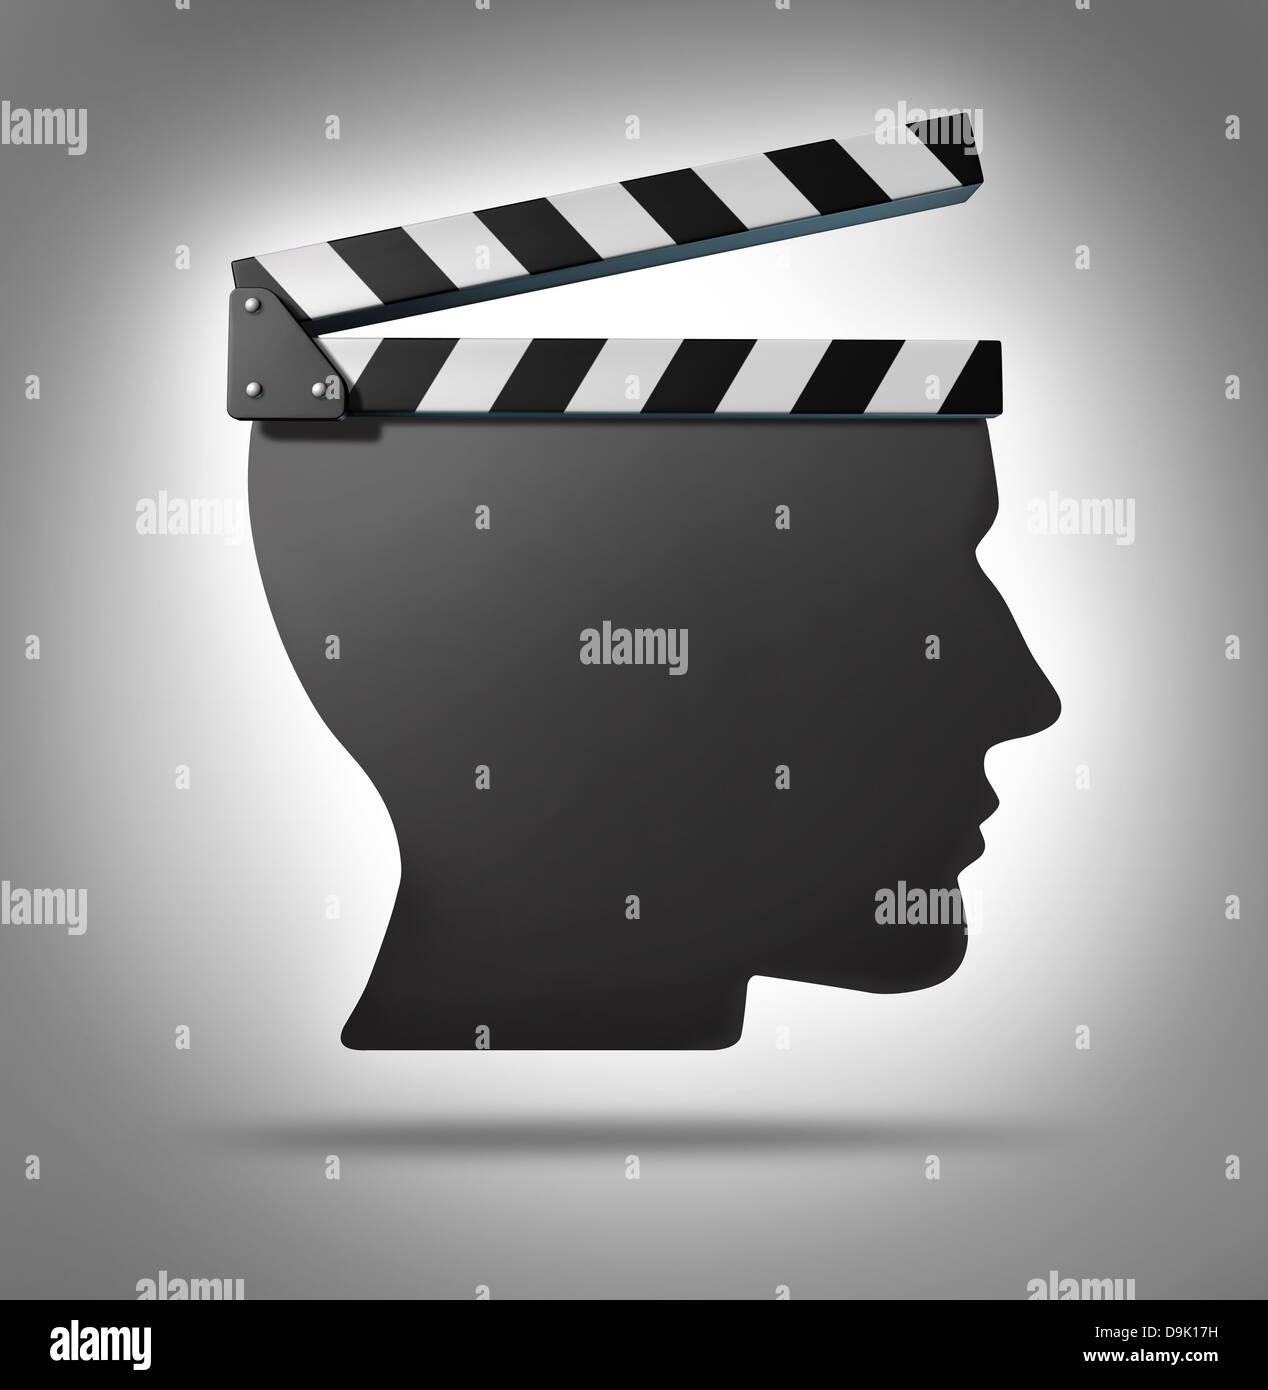 Life direction and human guidance as a symbol of a movie equipment clapboard shaped as a head ins a concept for living and taking action in your biography. Stock Photo